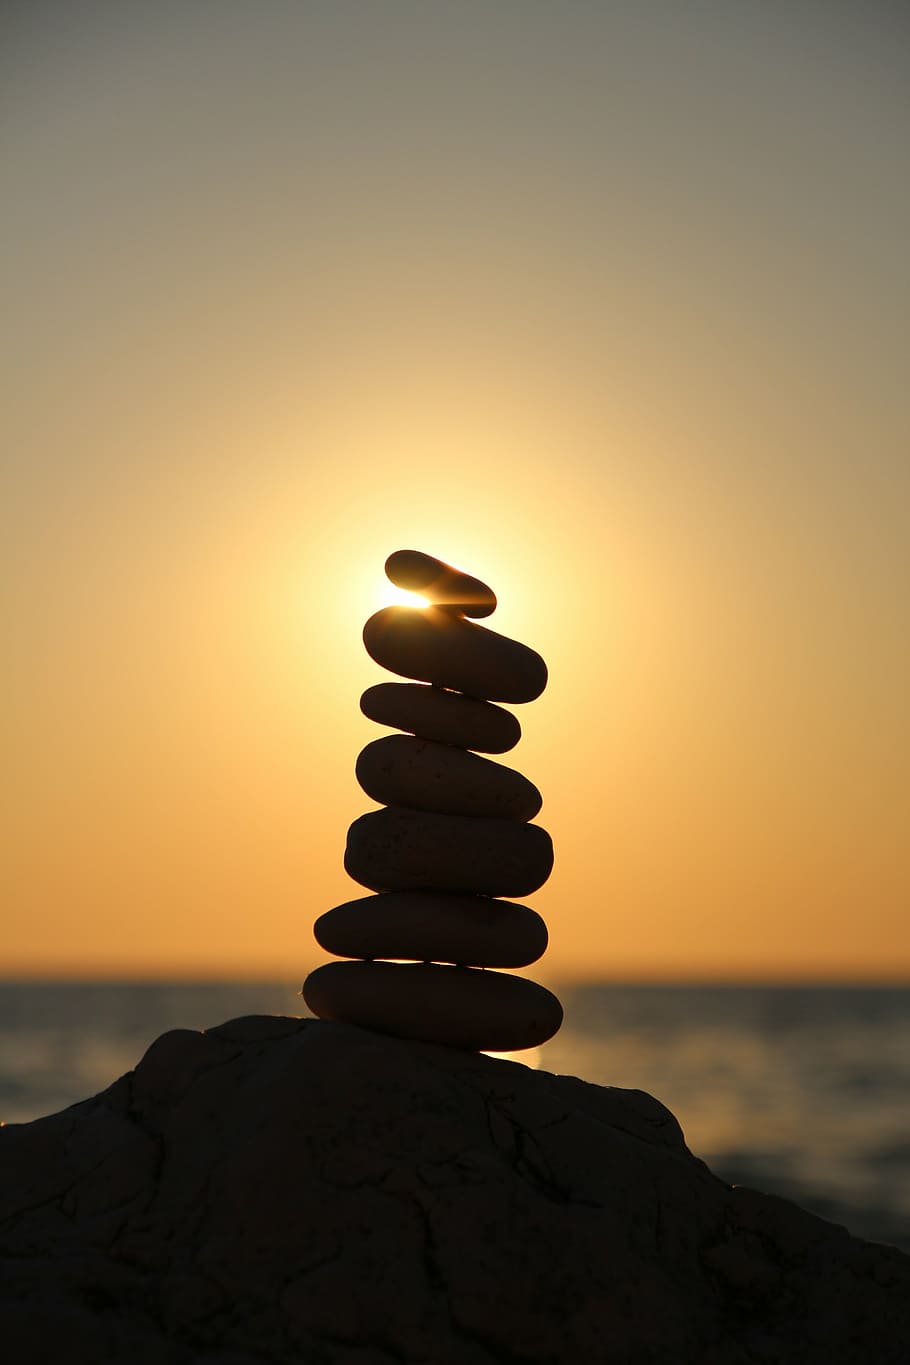 silhouette photography, stone balancing, balance, stones, stone tower, tower, layered, beach, relaxation, cairn